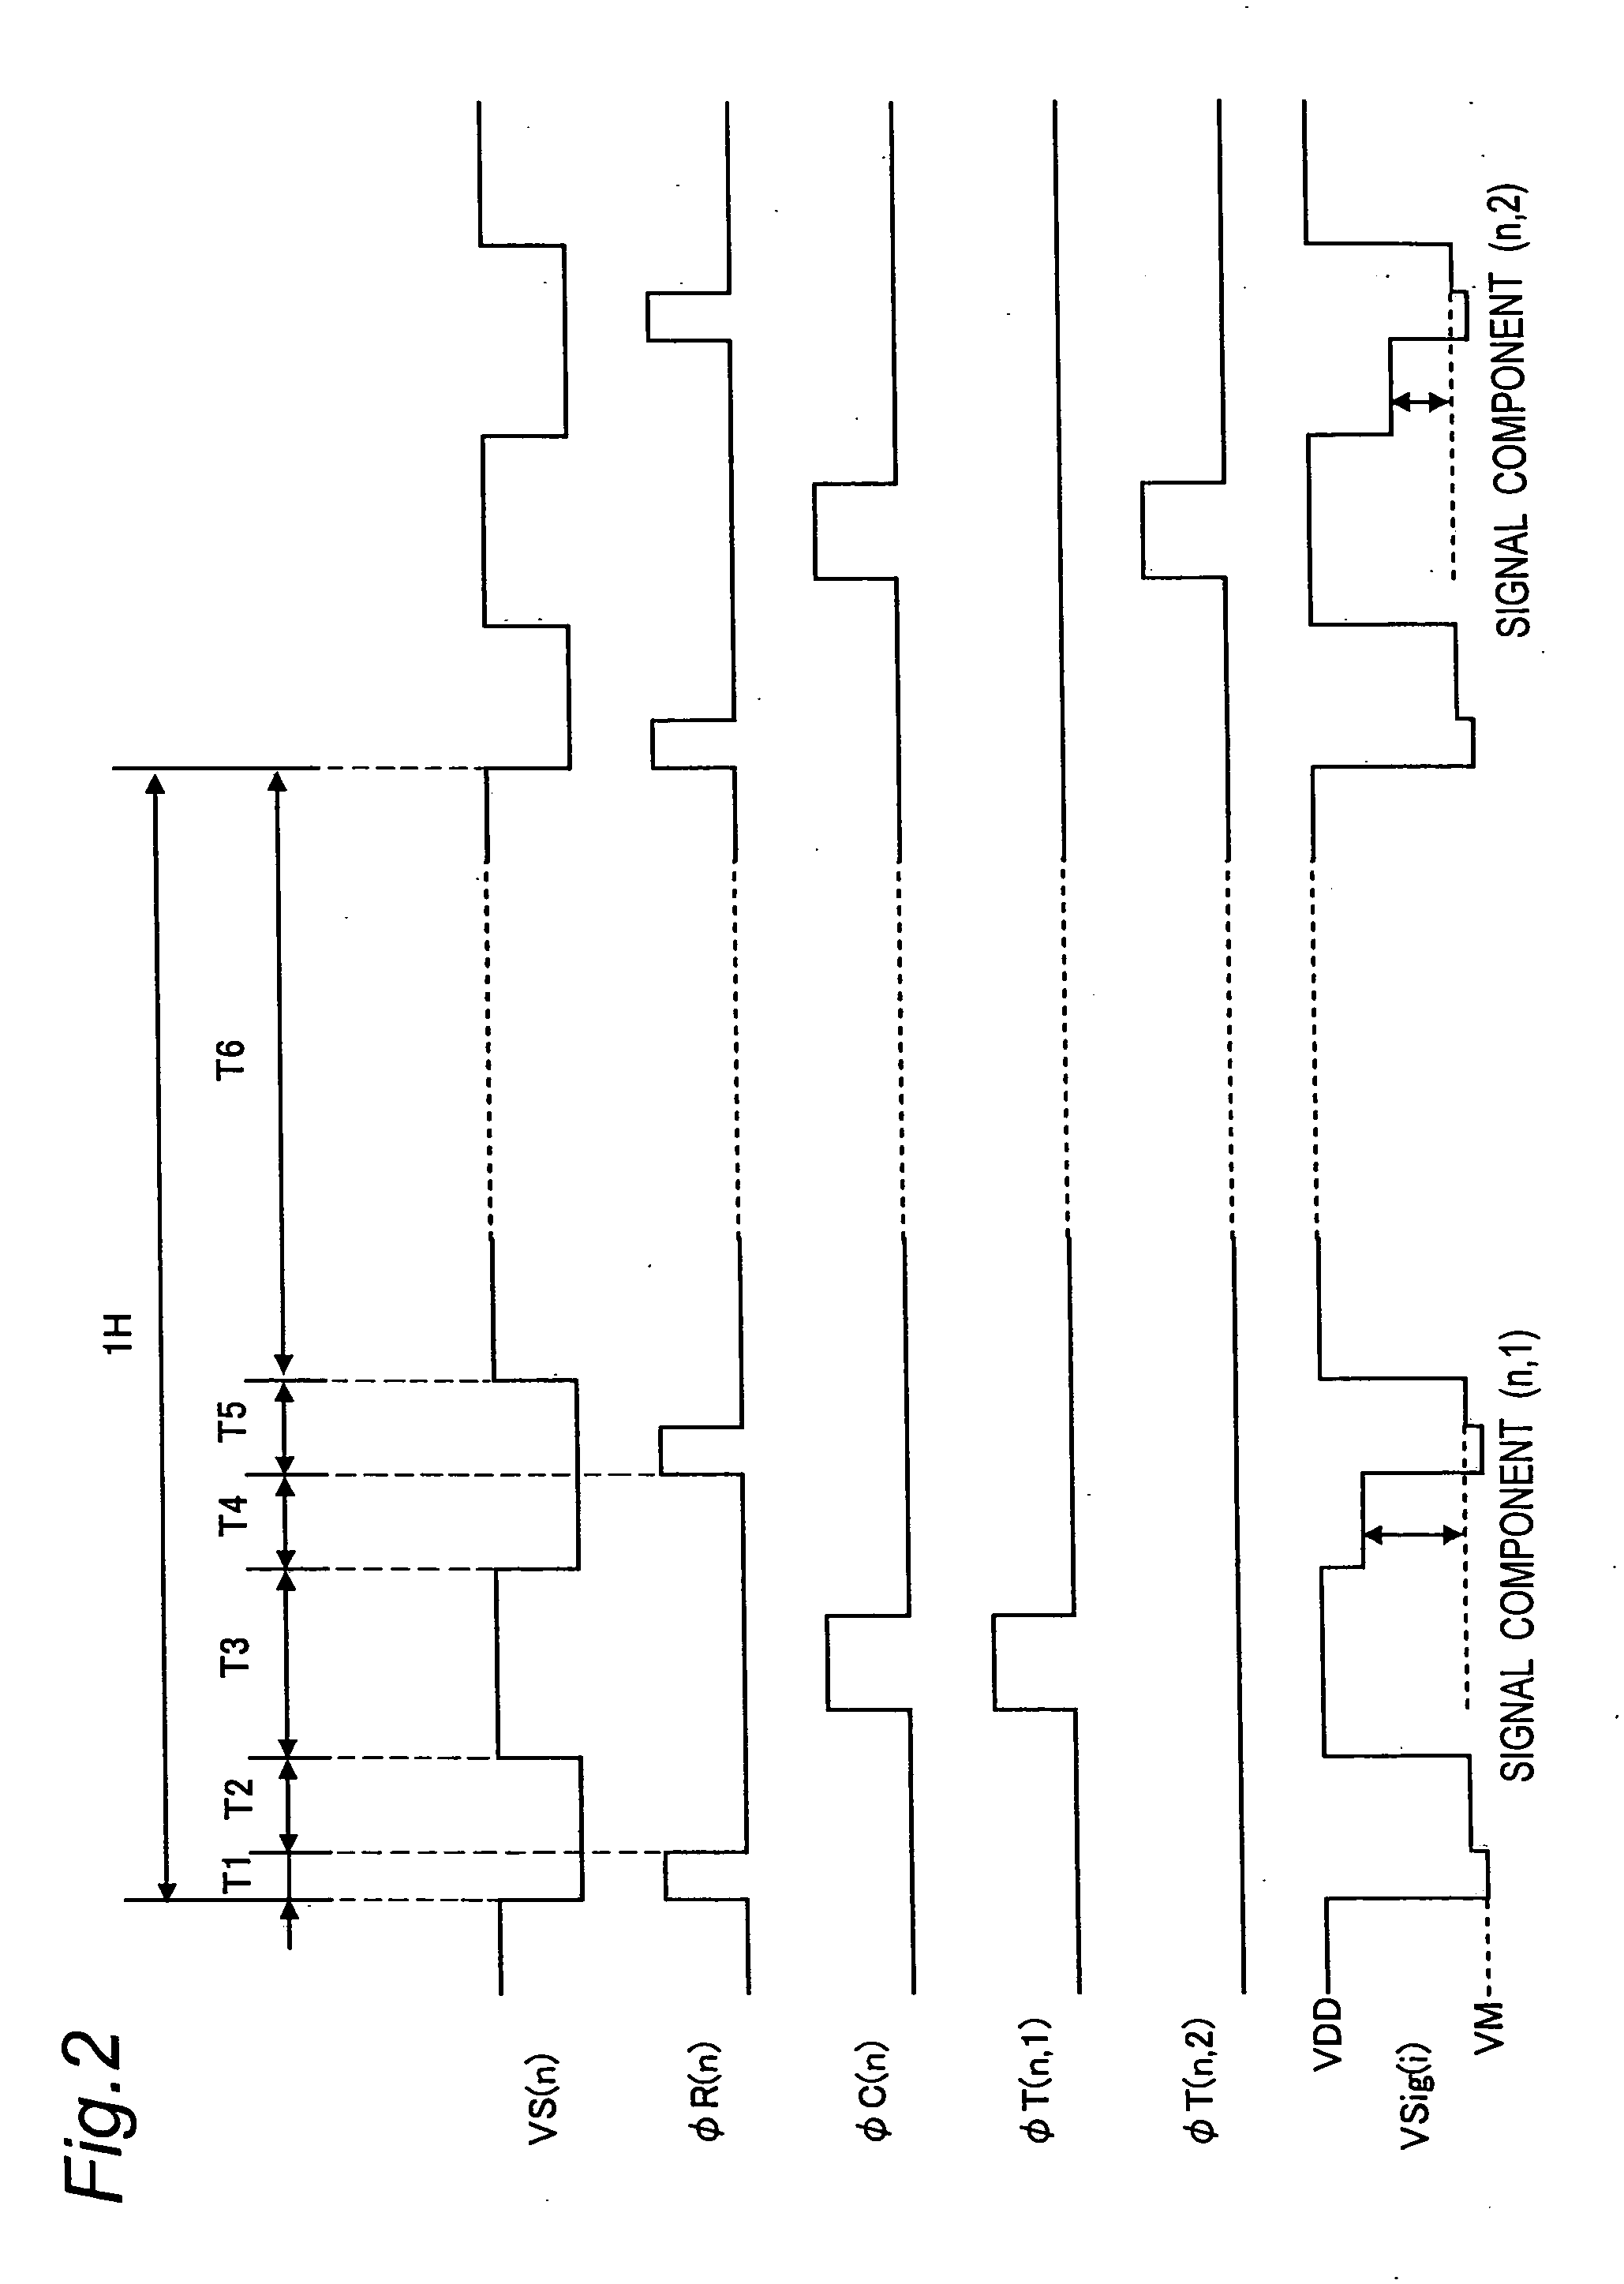 Amplifying solid-state imaging device